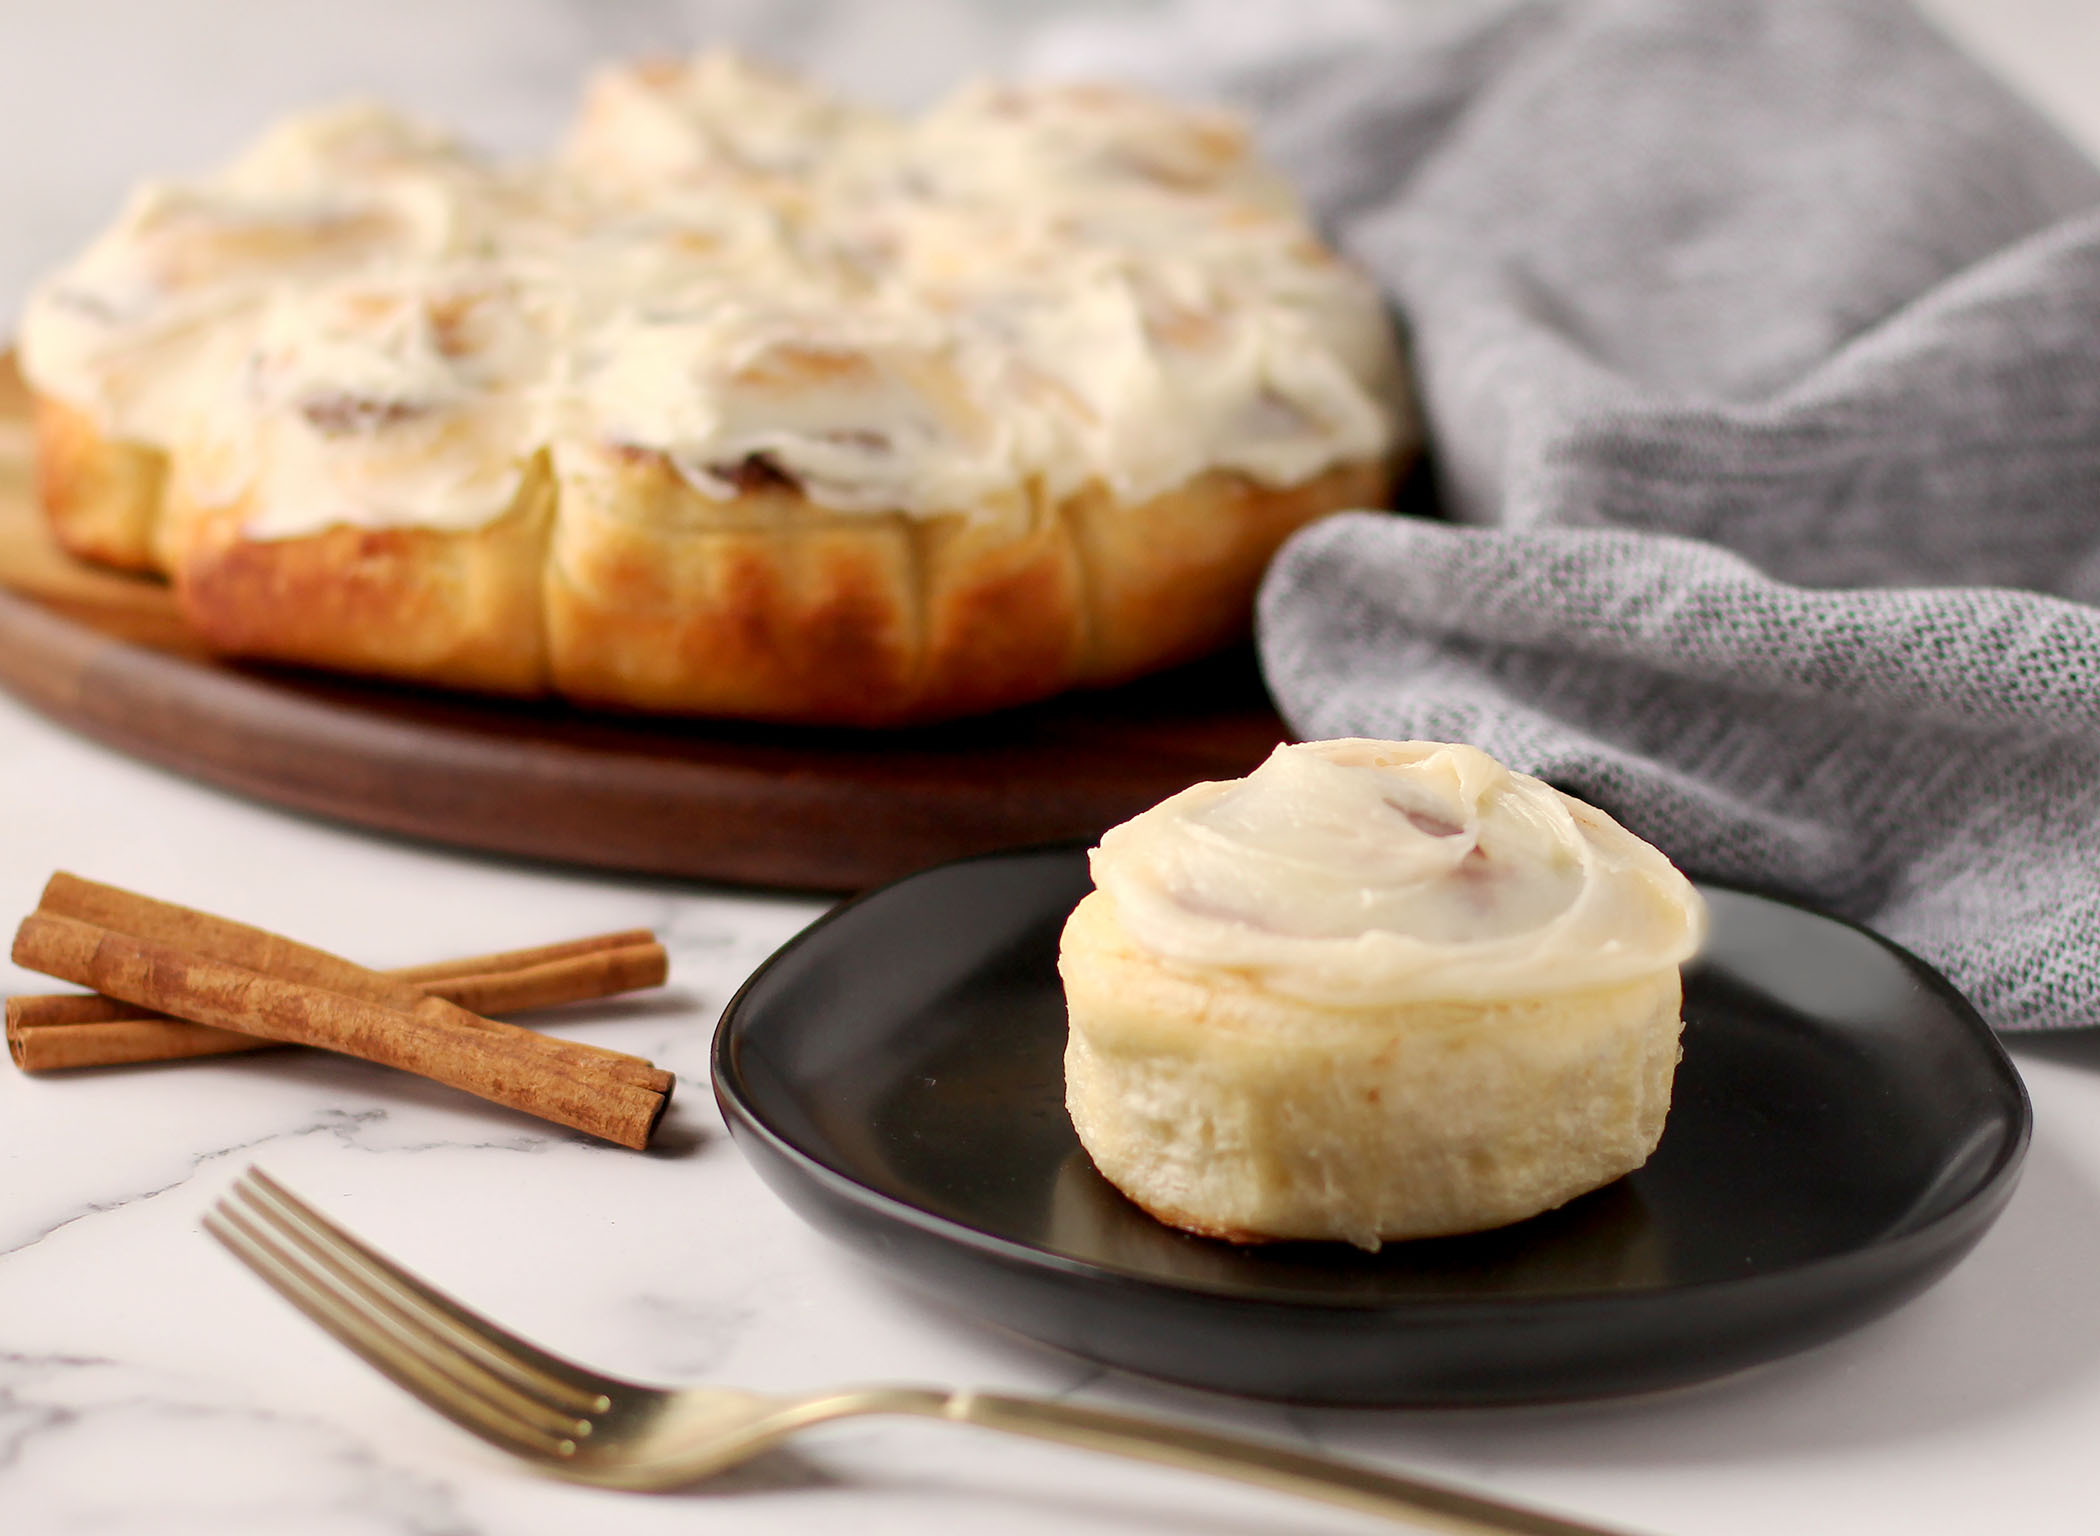 Cinnamon Pastry Rolls together on a serving platter with a single roll on a plate. Cinnamon sticks used as garnish.